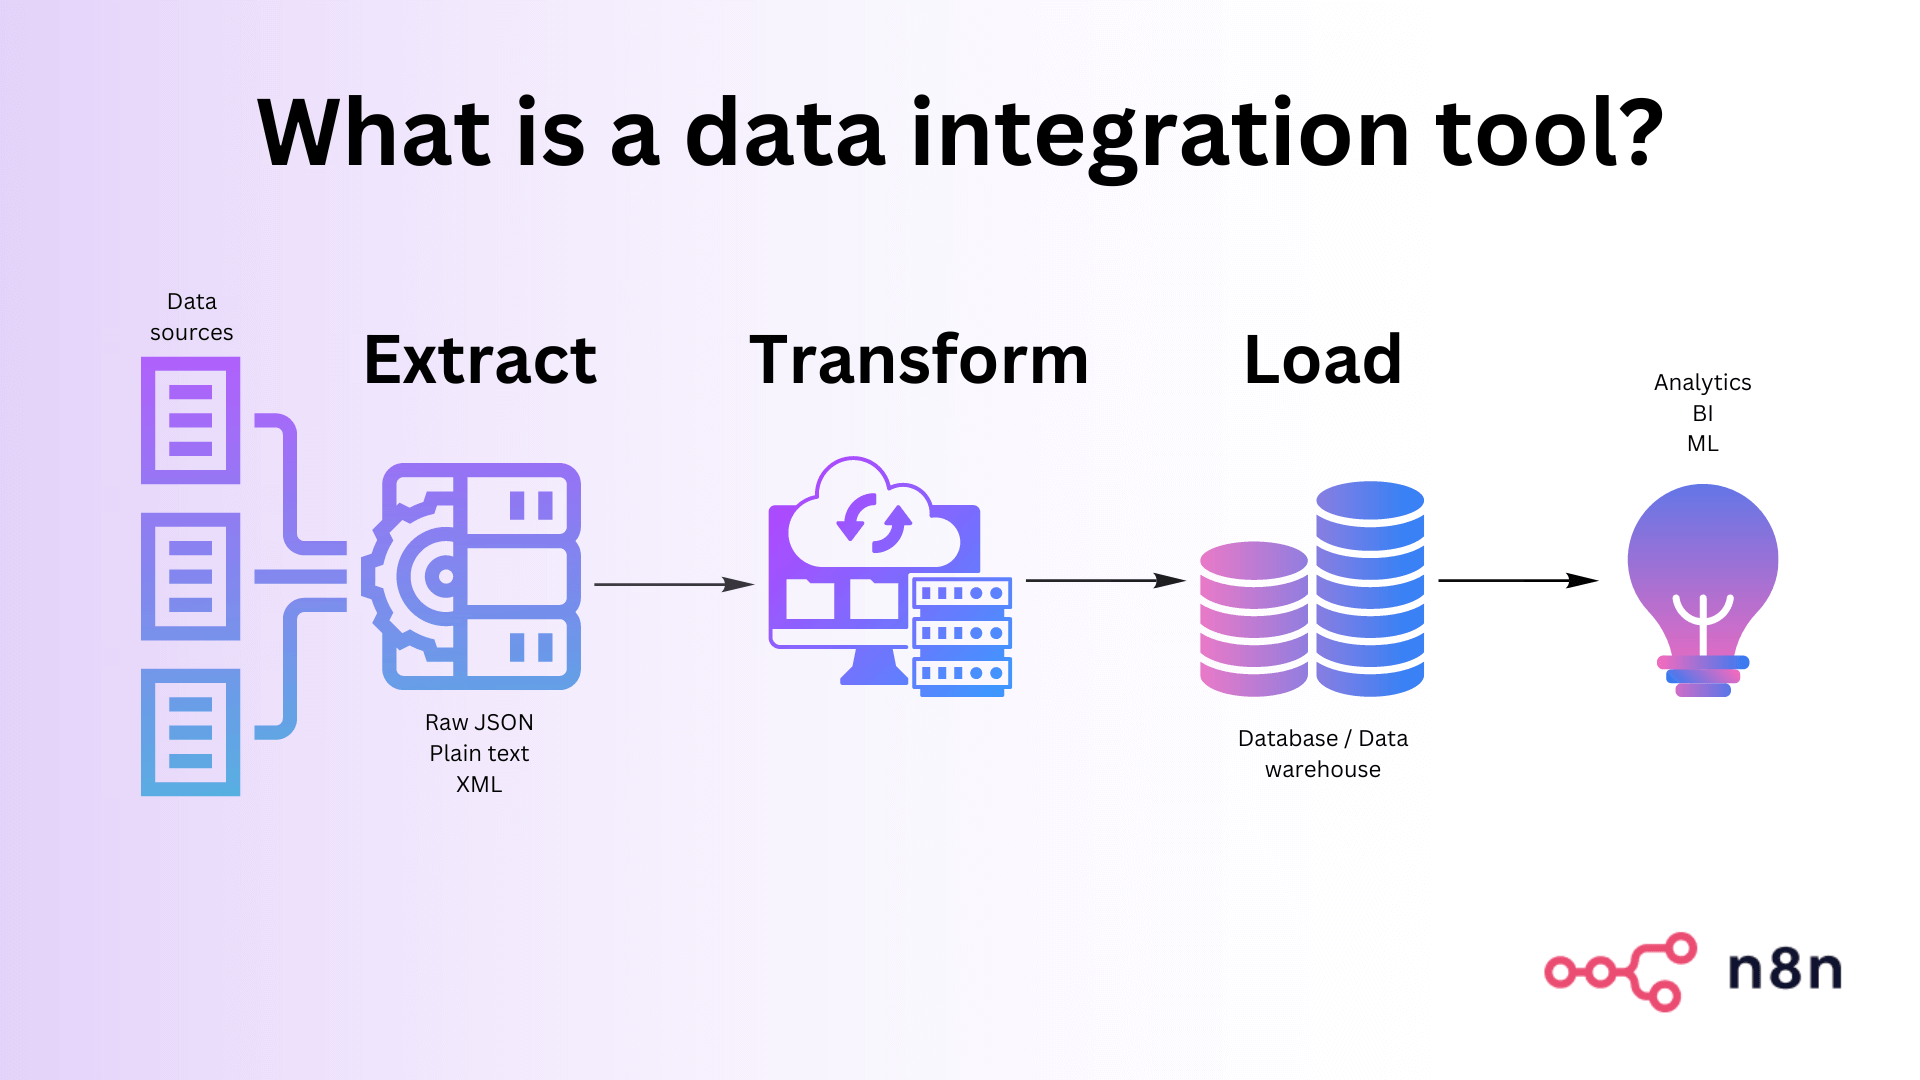 What is a data integration tool?